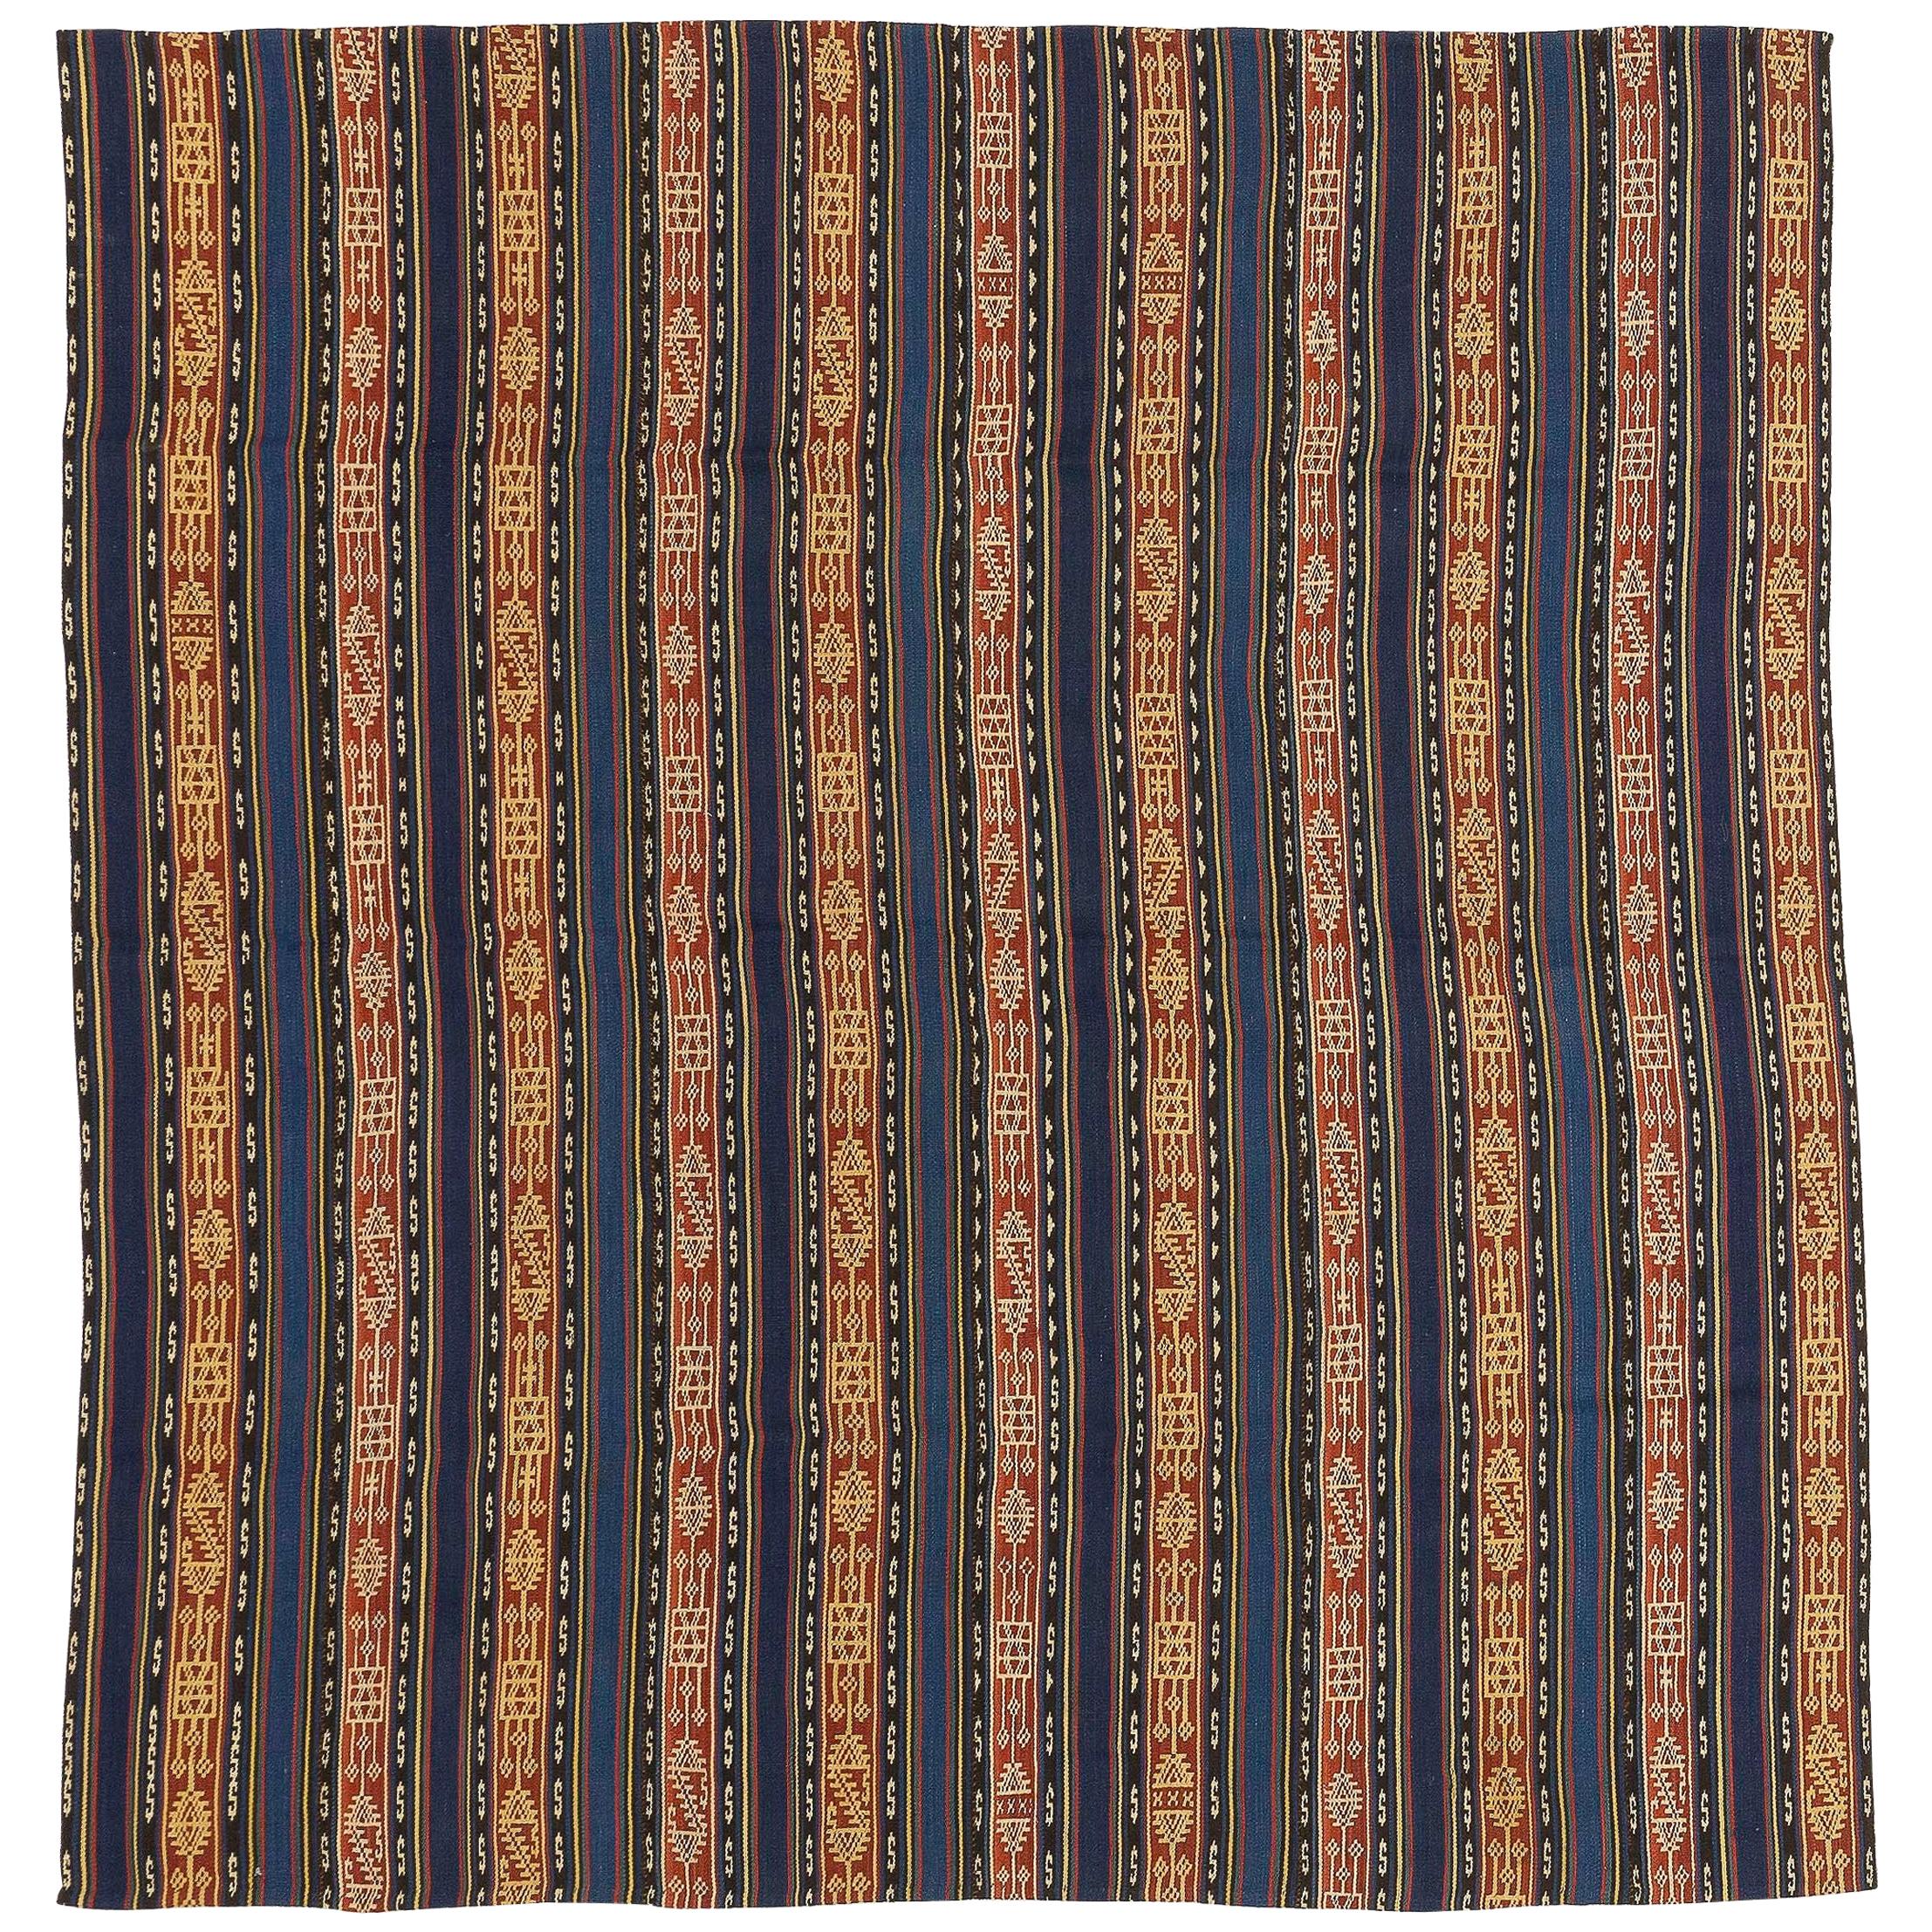 Antique Persian Jajim Flat-Weave Rug with Navy & Brown Tribal Stripes